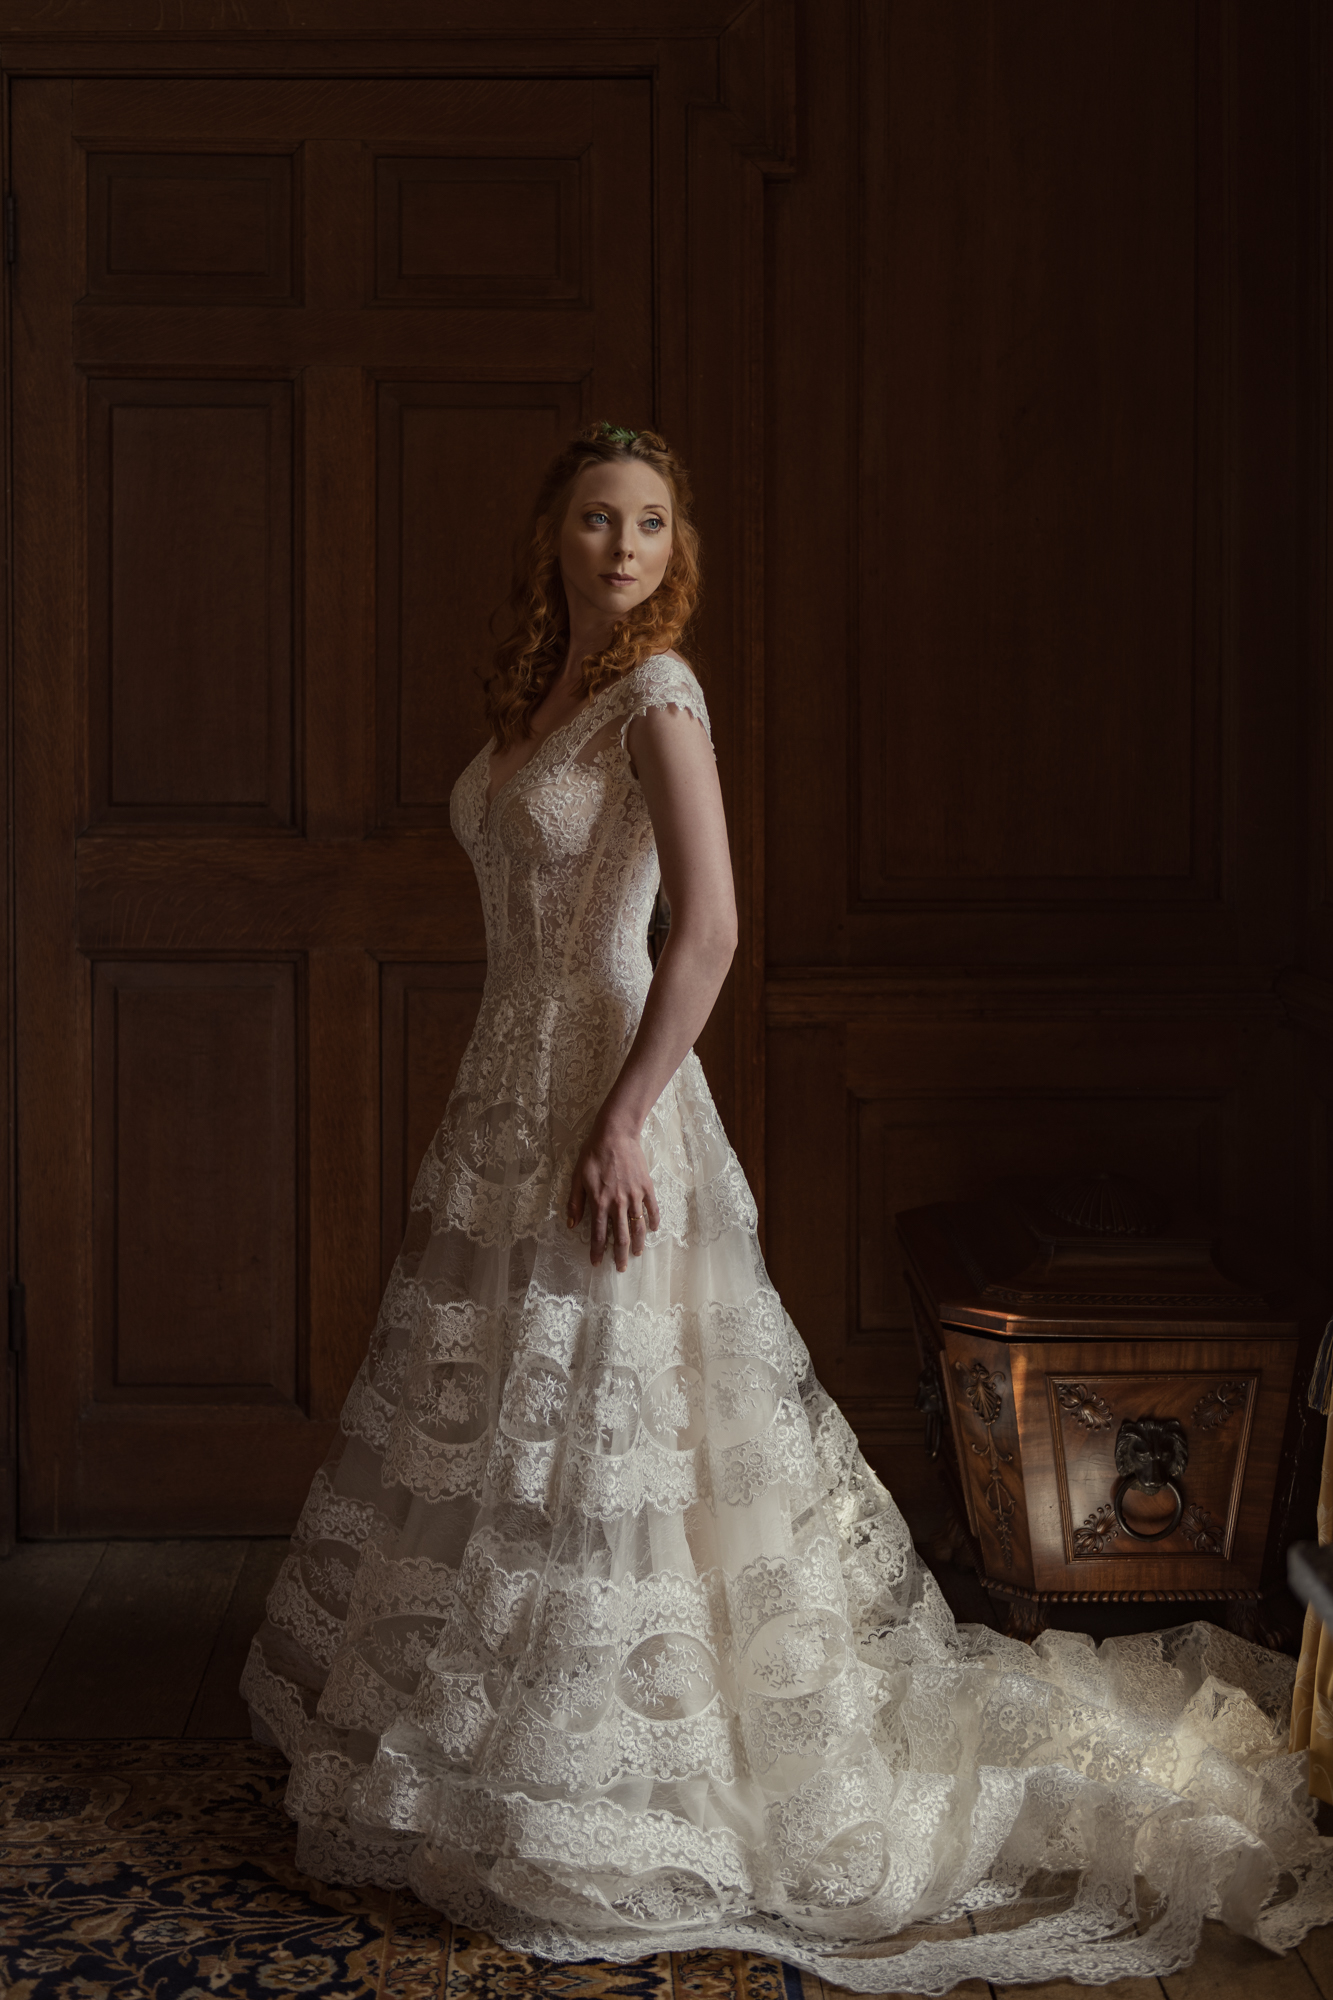 2 A Pre Raphaelite inspired love story pushing the boundaries of bridal style